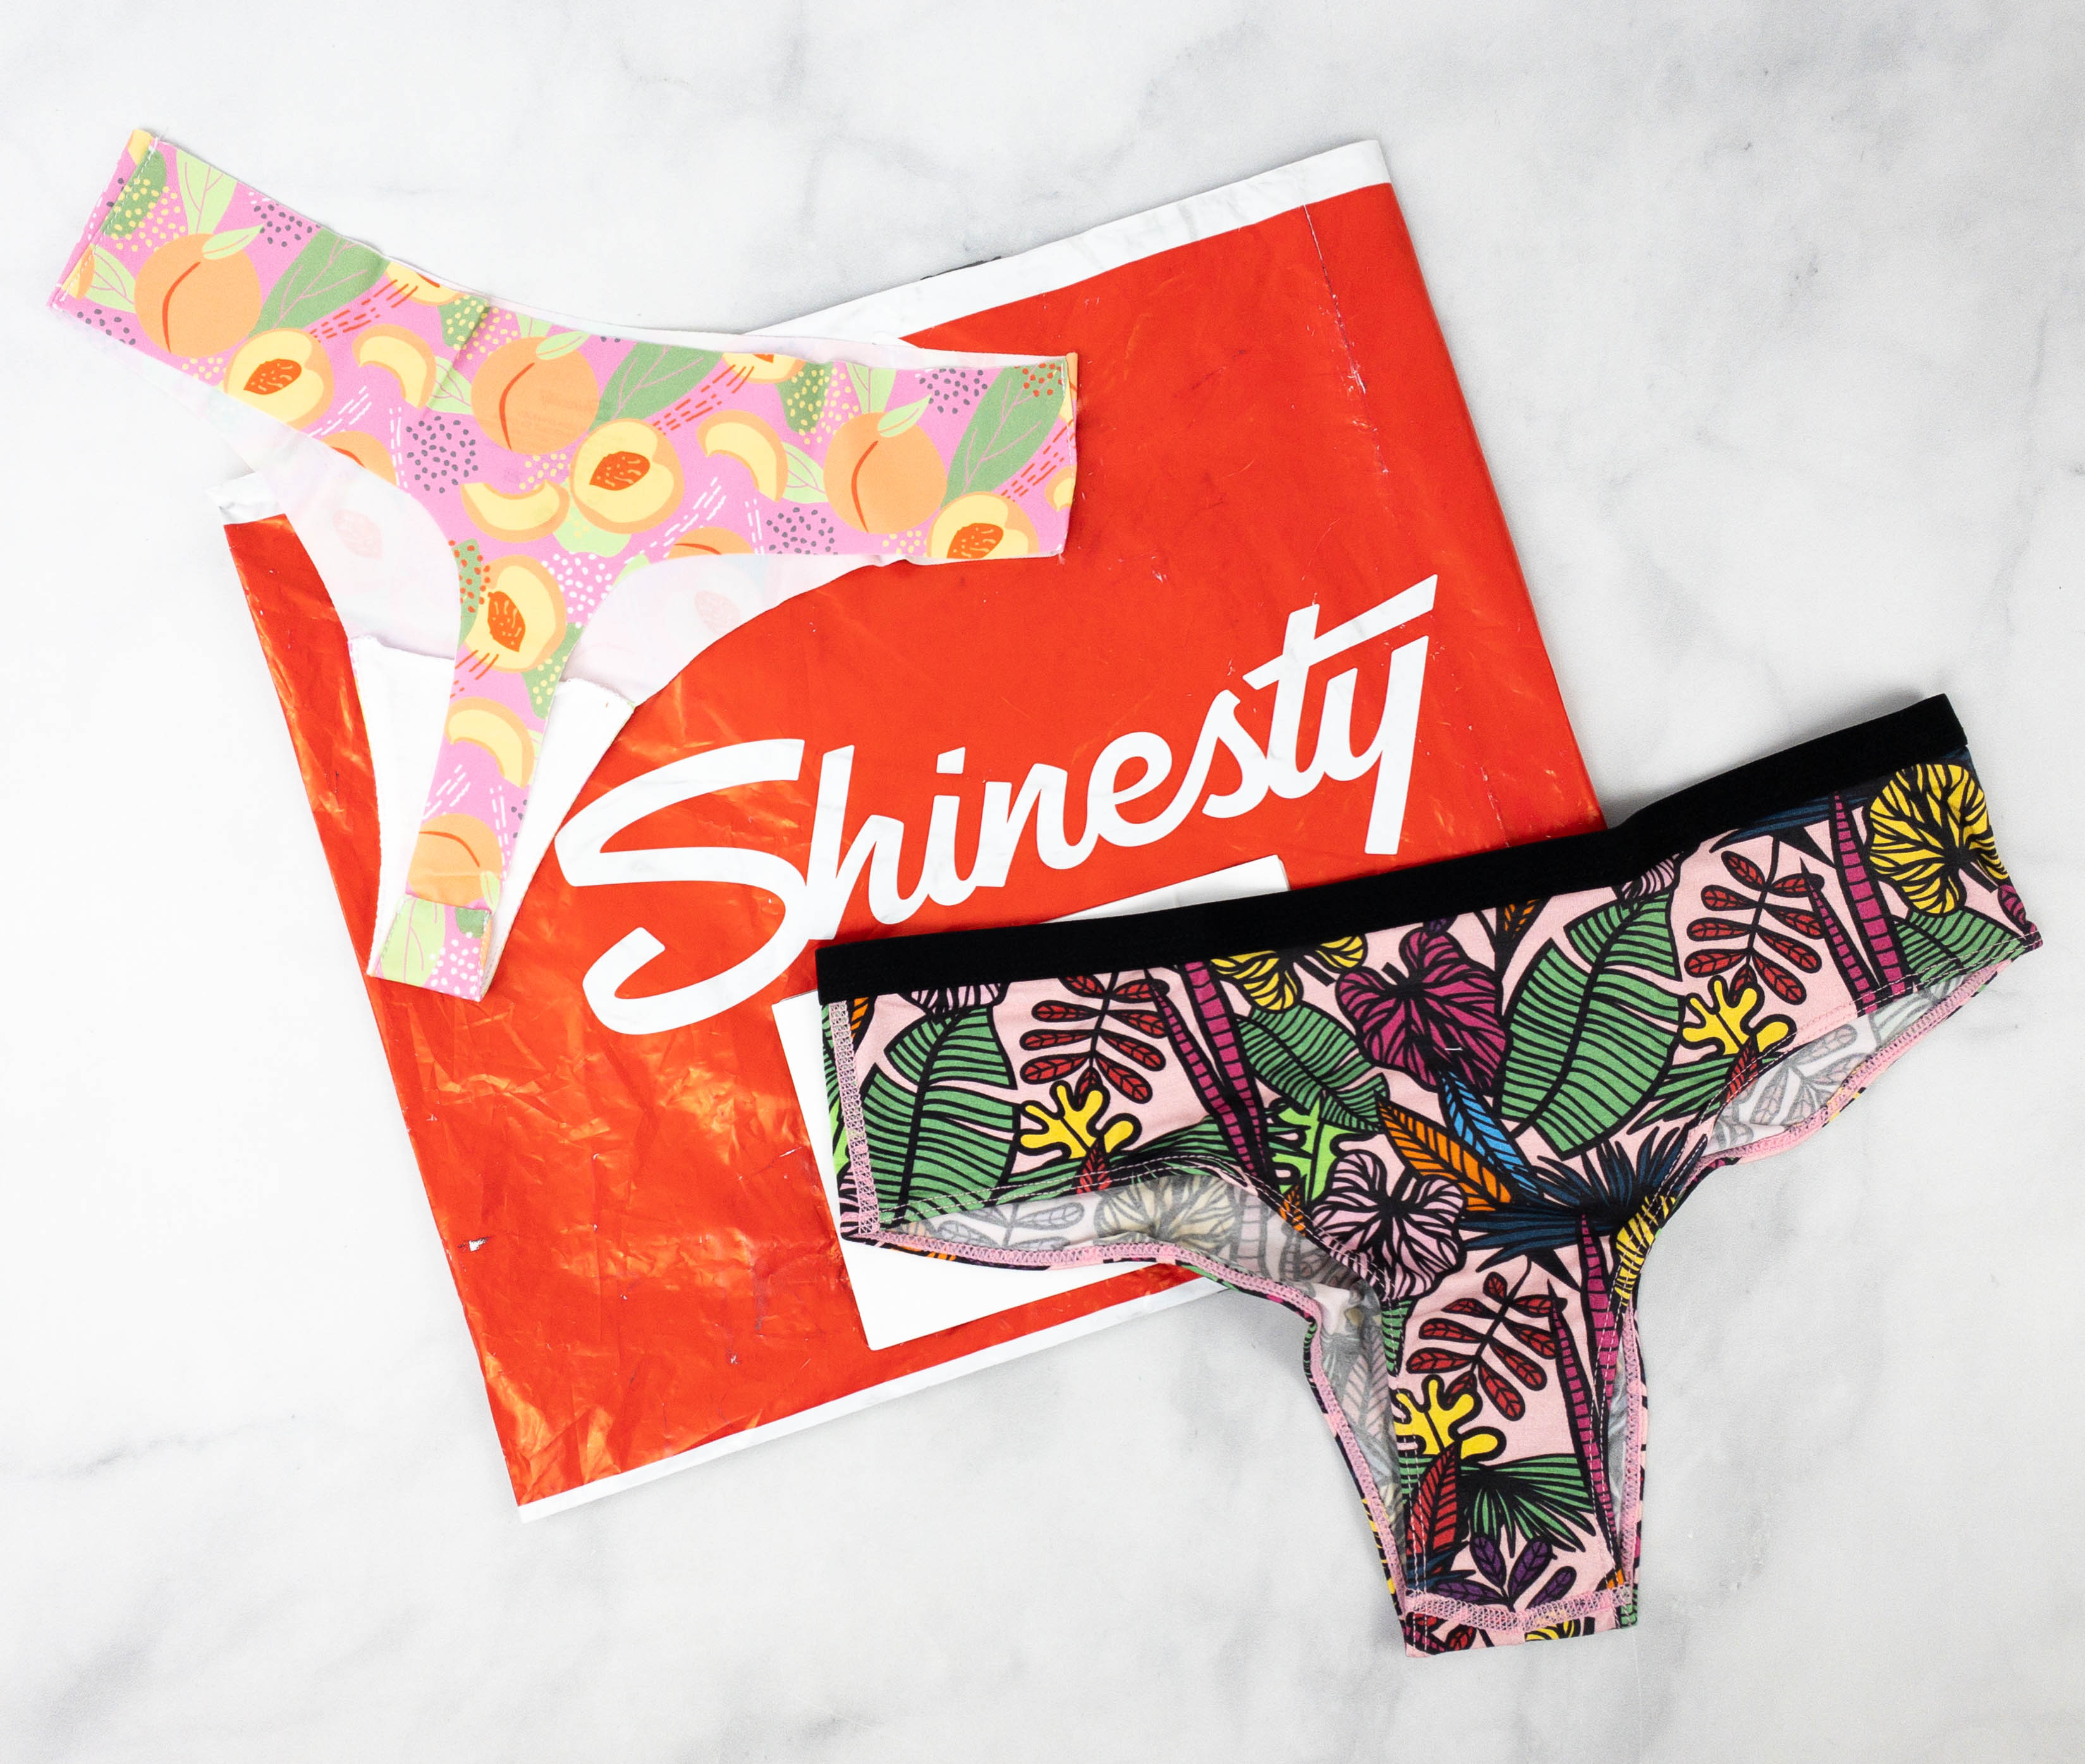 Shinesty Underwear Subscription Review + Coupon - Women - Hello Subscription